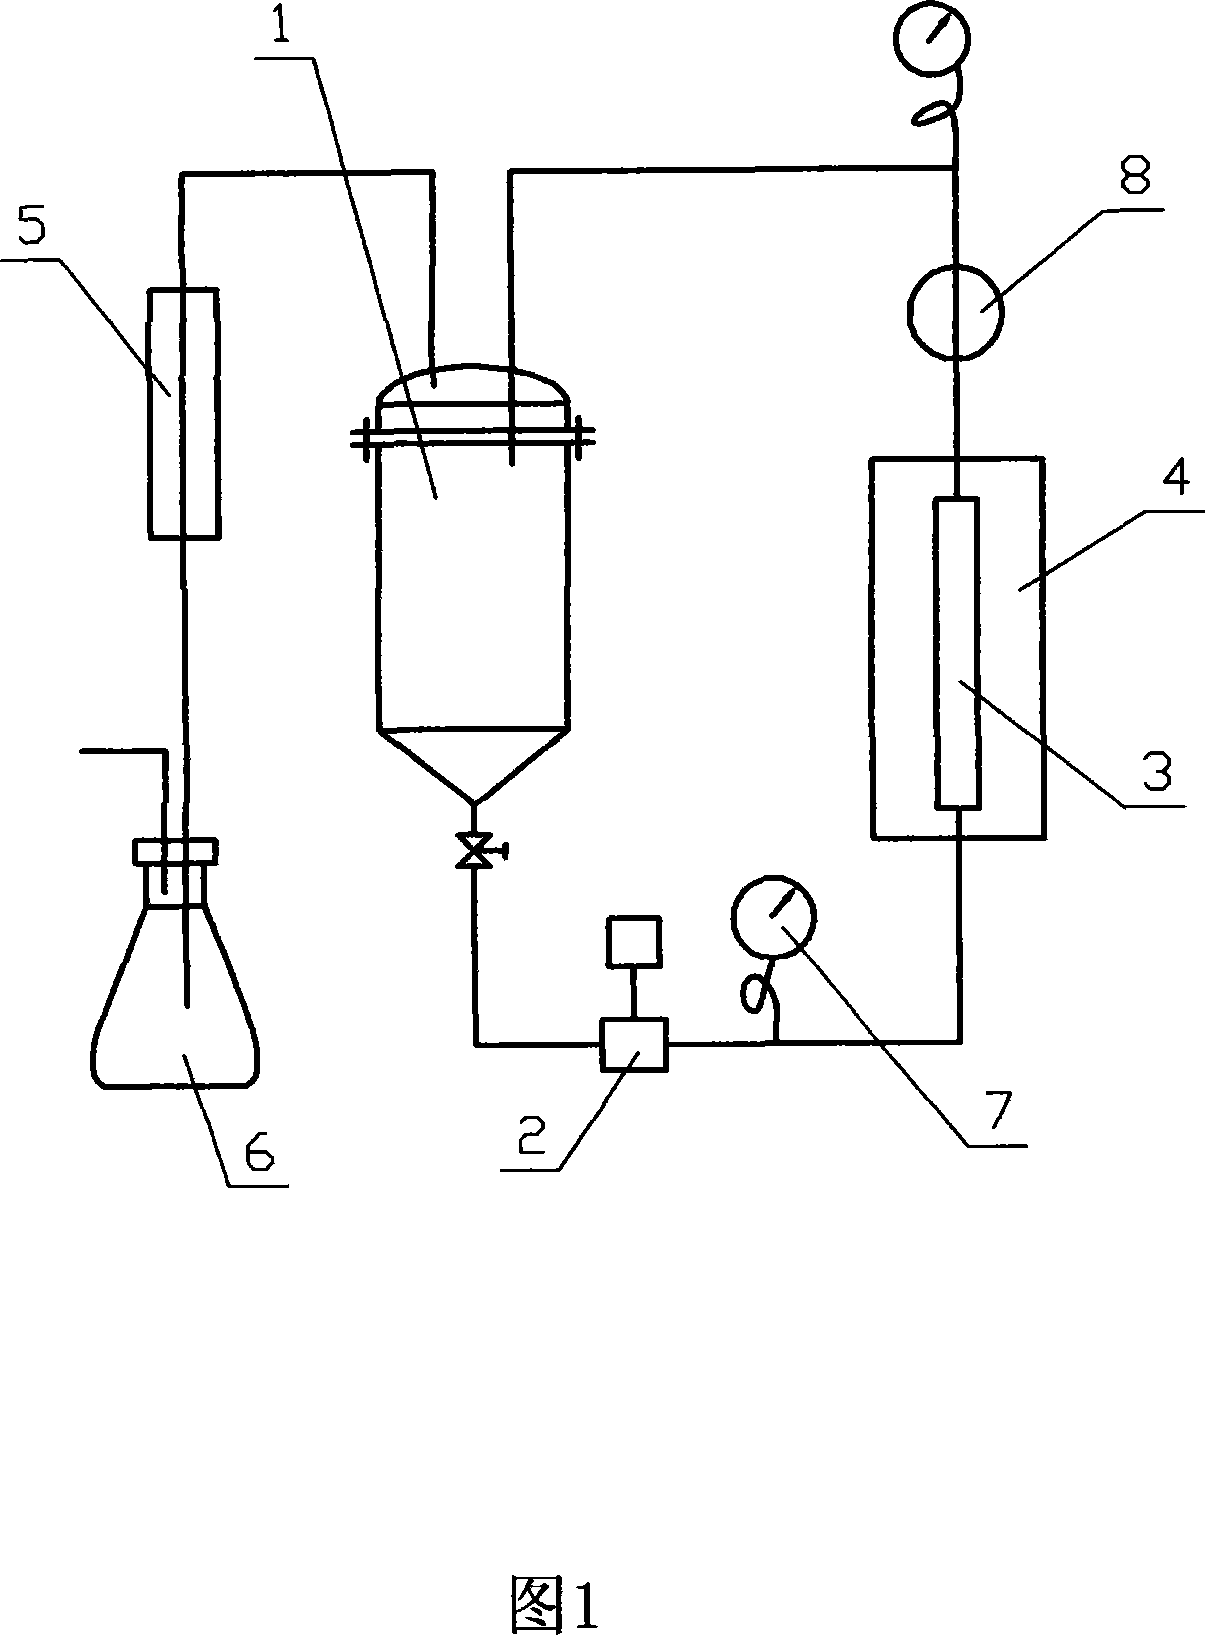 Adding substance for reducing furnace tube deposition coking and improving liquid yield of delayed coker